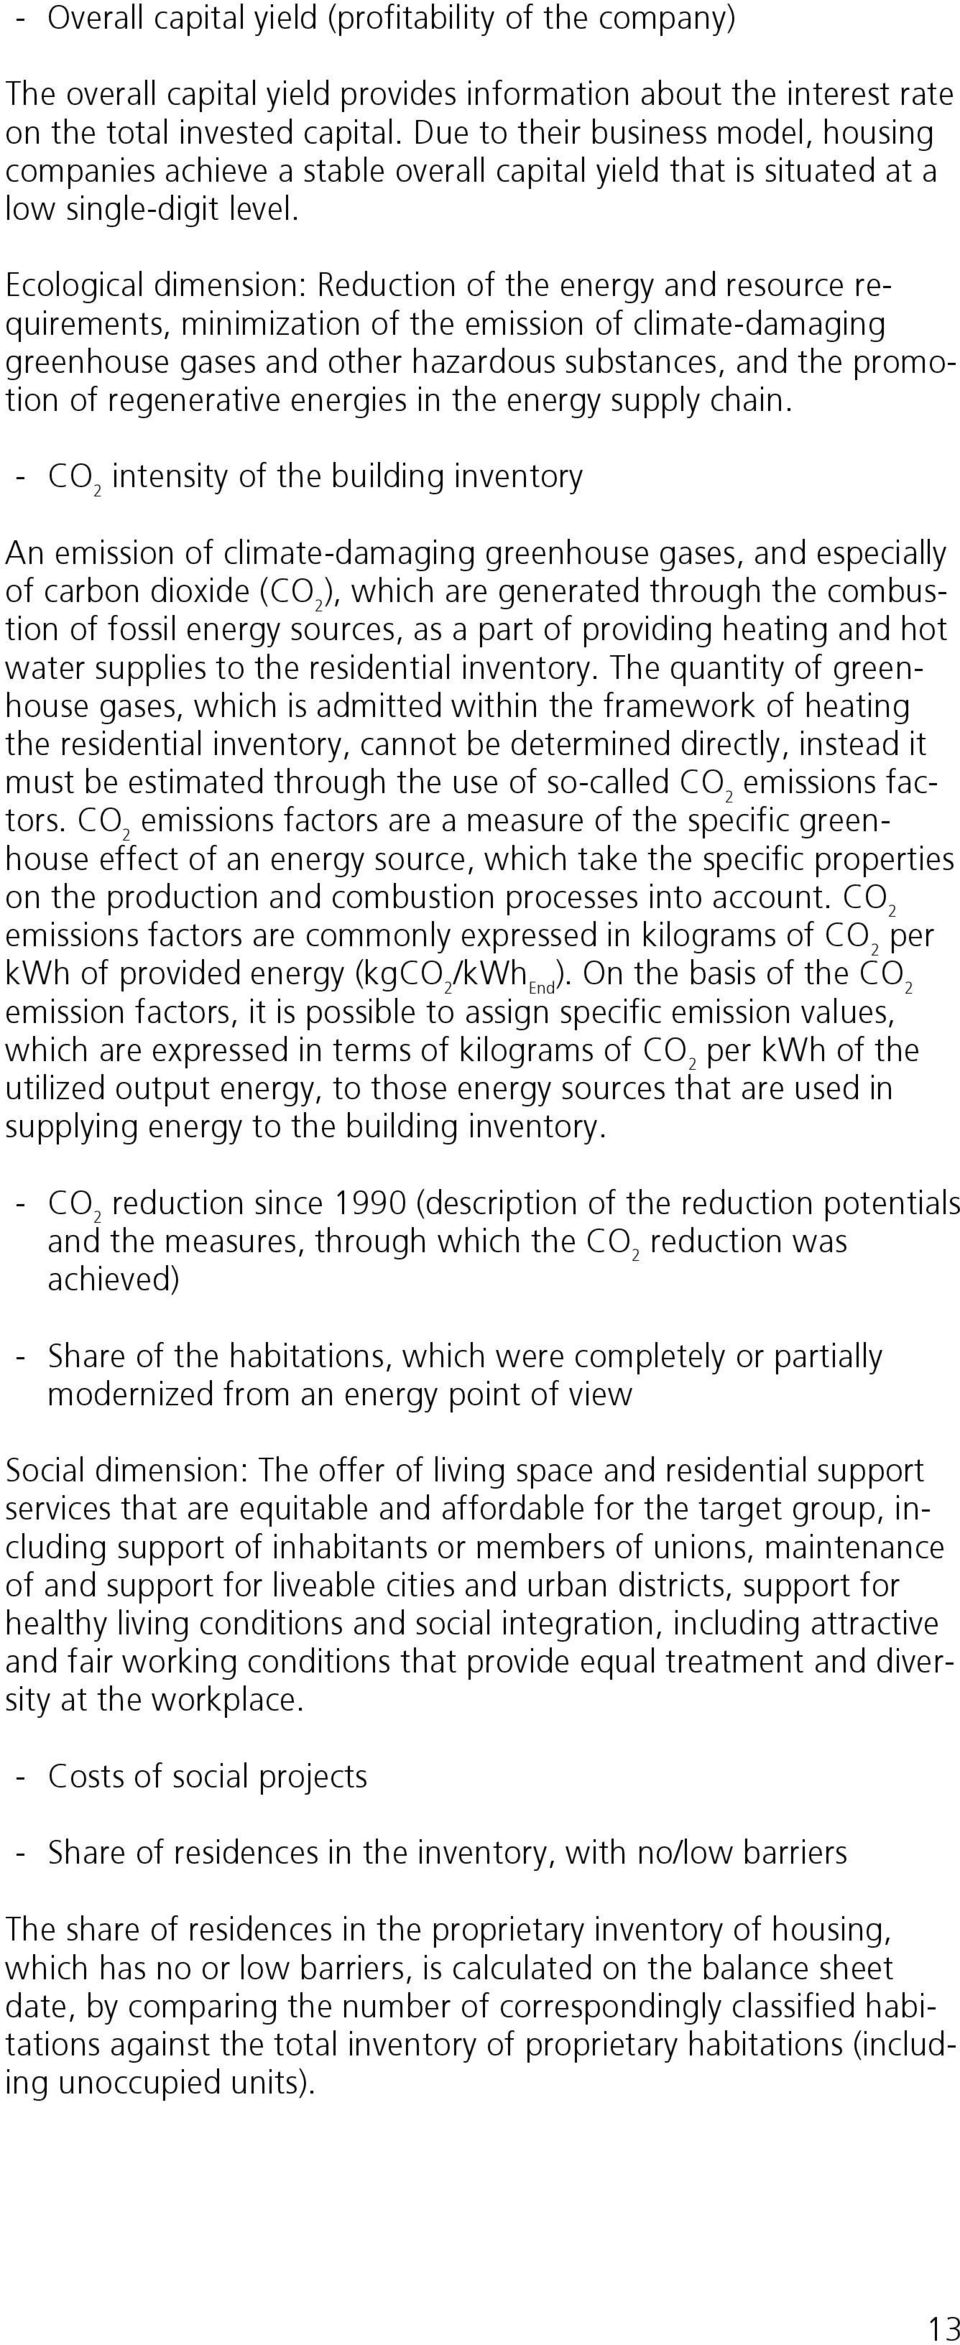 Ecological dimension: Reduction of the energy and resource requirements, minimization of the emission of climate-damaging greenhouse gases and other hazardous substances, and the promotion of